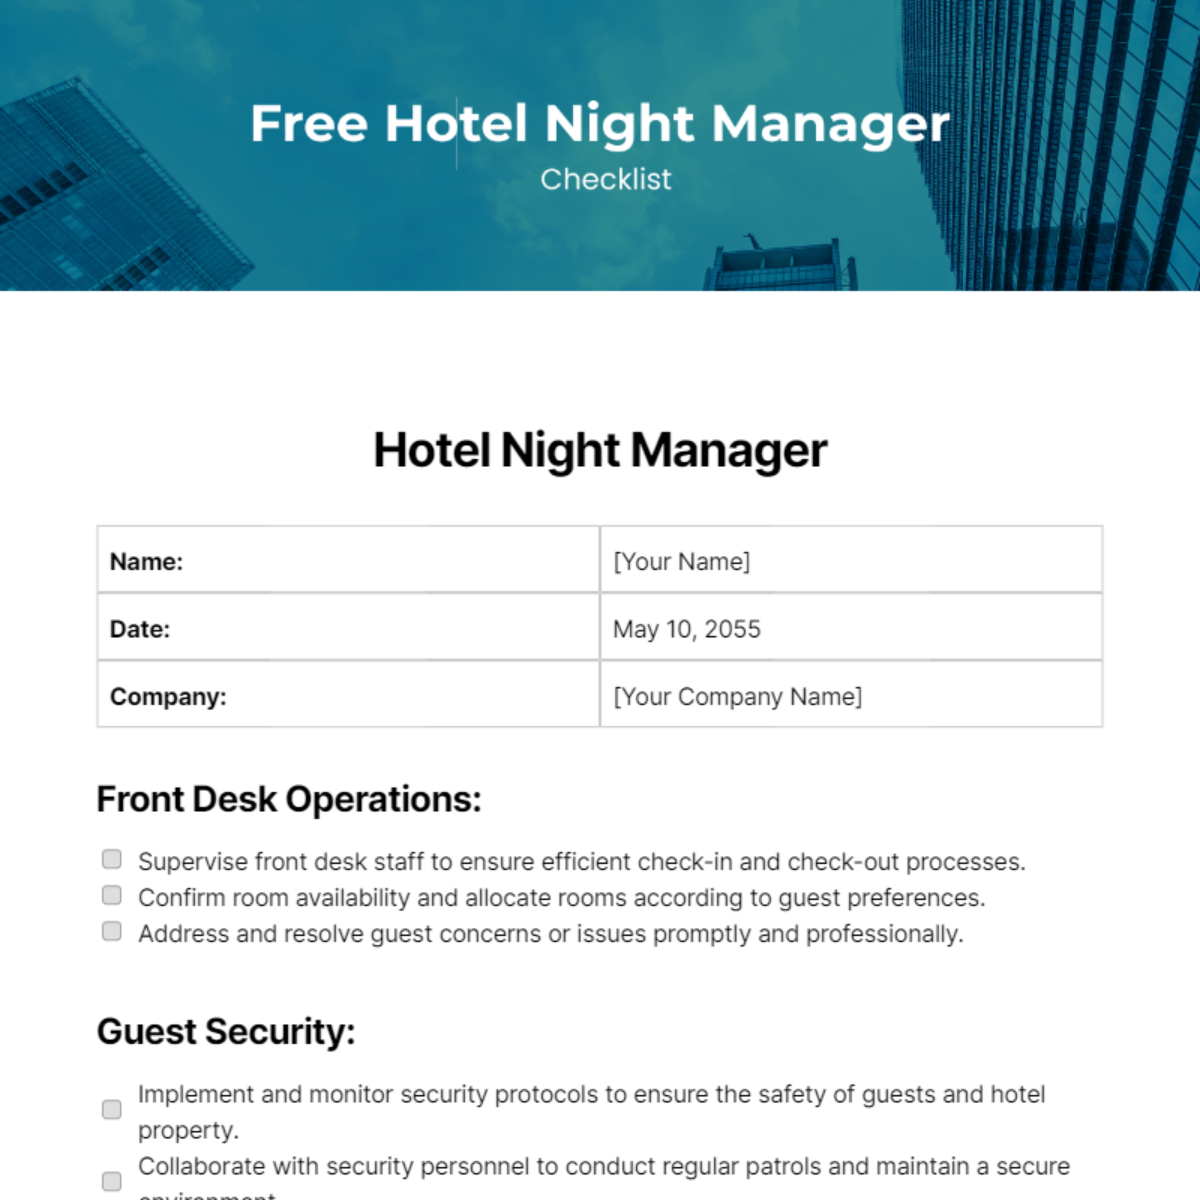 Hotel Night Manager Checklist Template